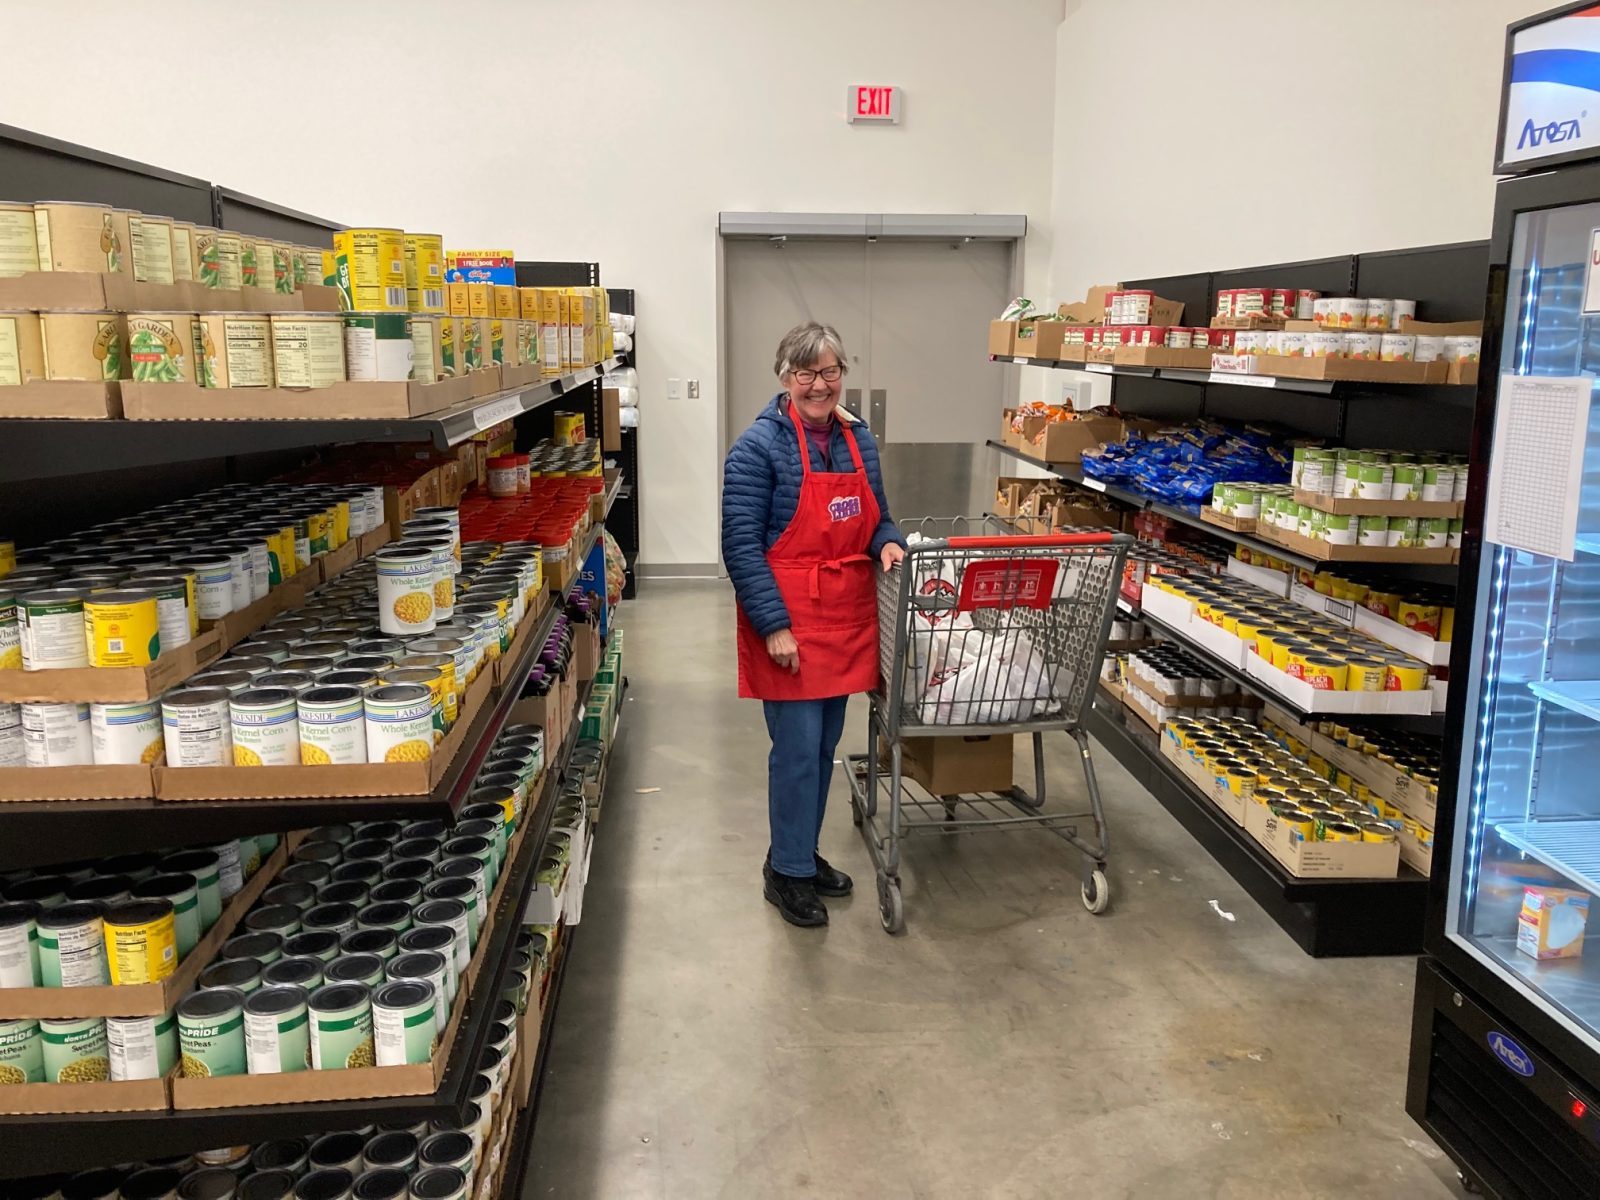 Ellen VanOsdol is a volunteer for Crosslines, the food pantry at Council of Churches of the Ozarks